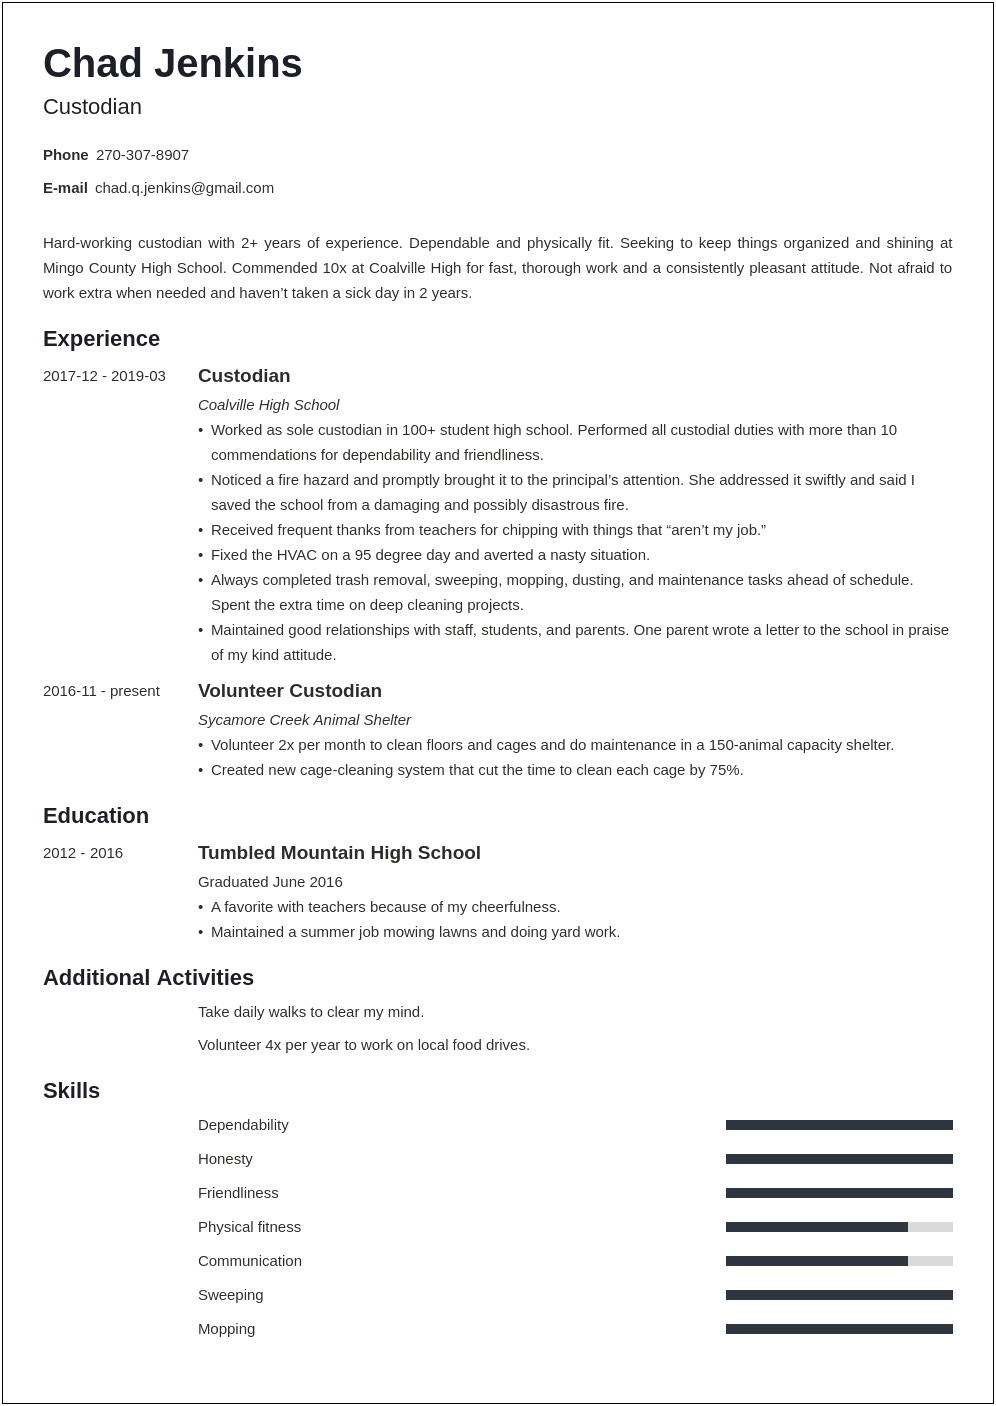 Resume Objective For Custodian And Cafe